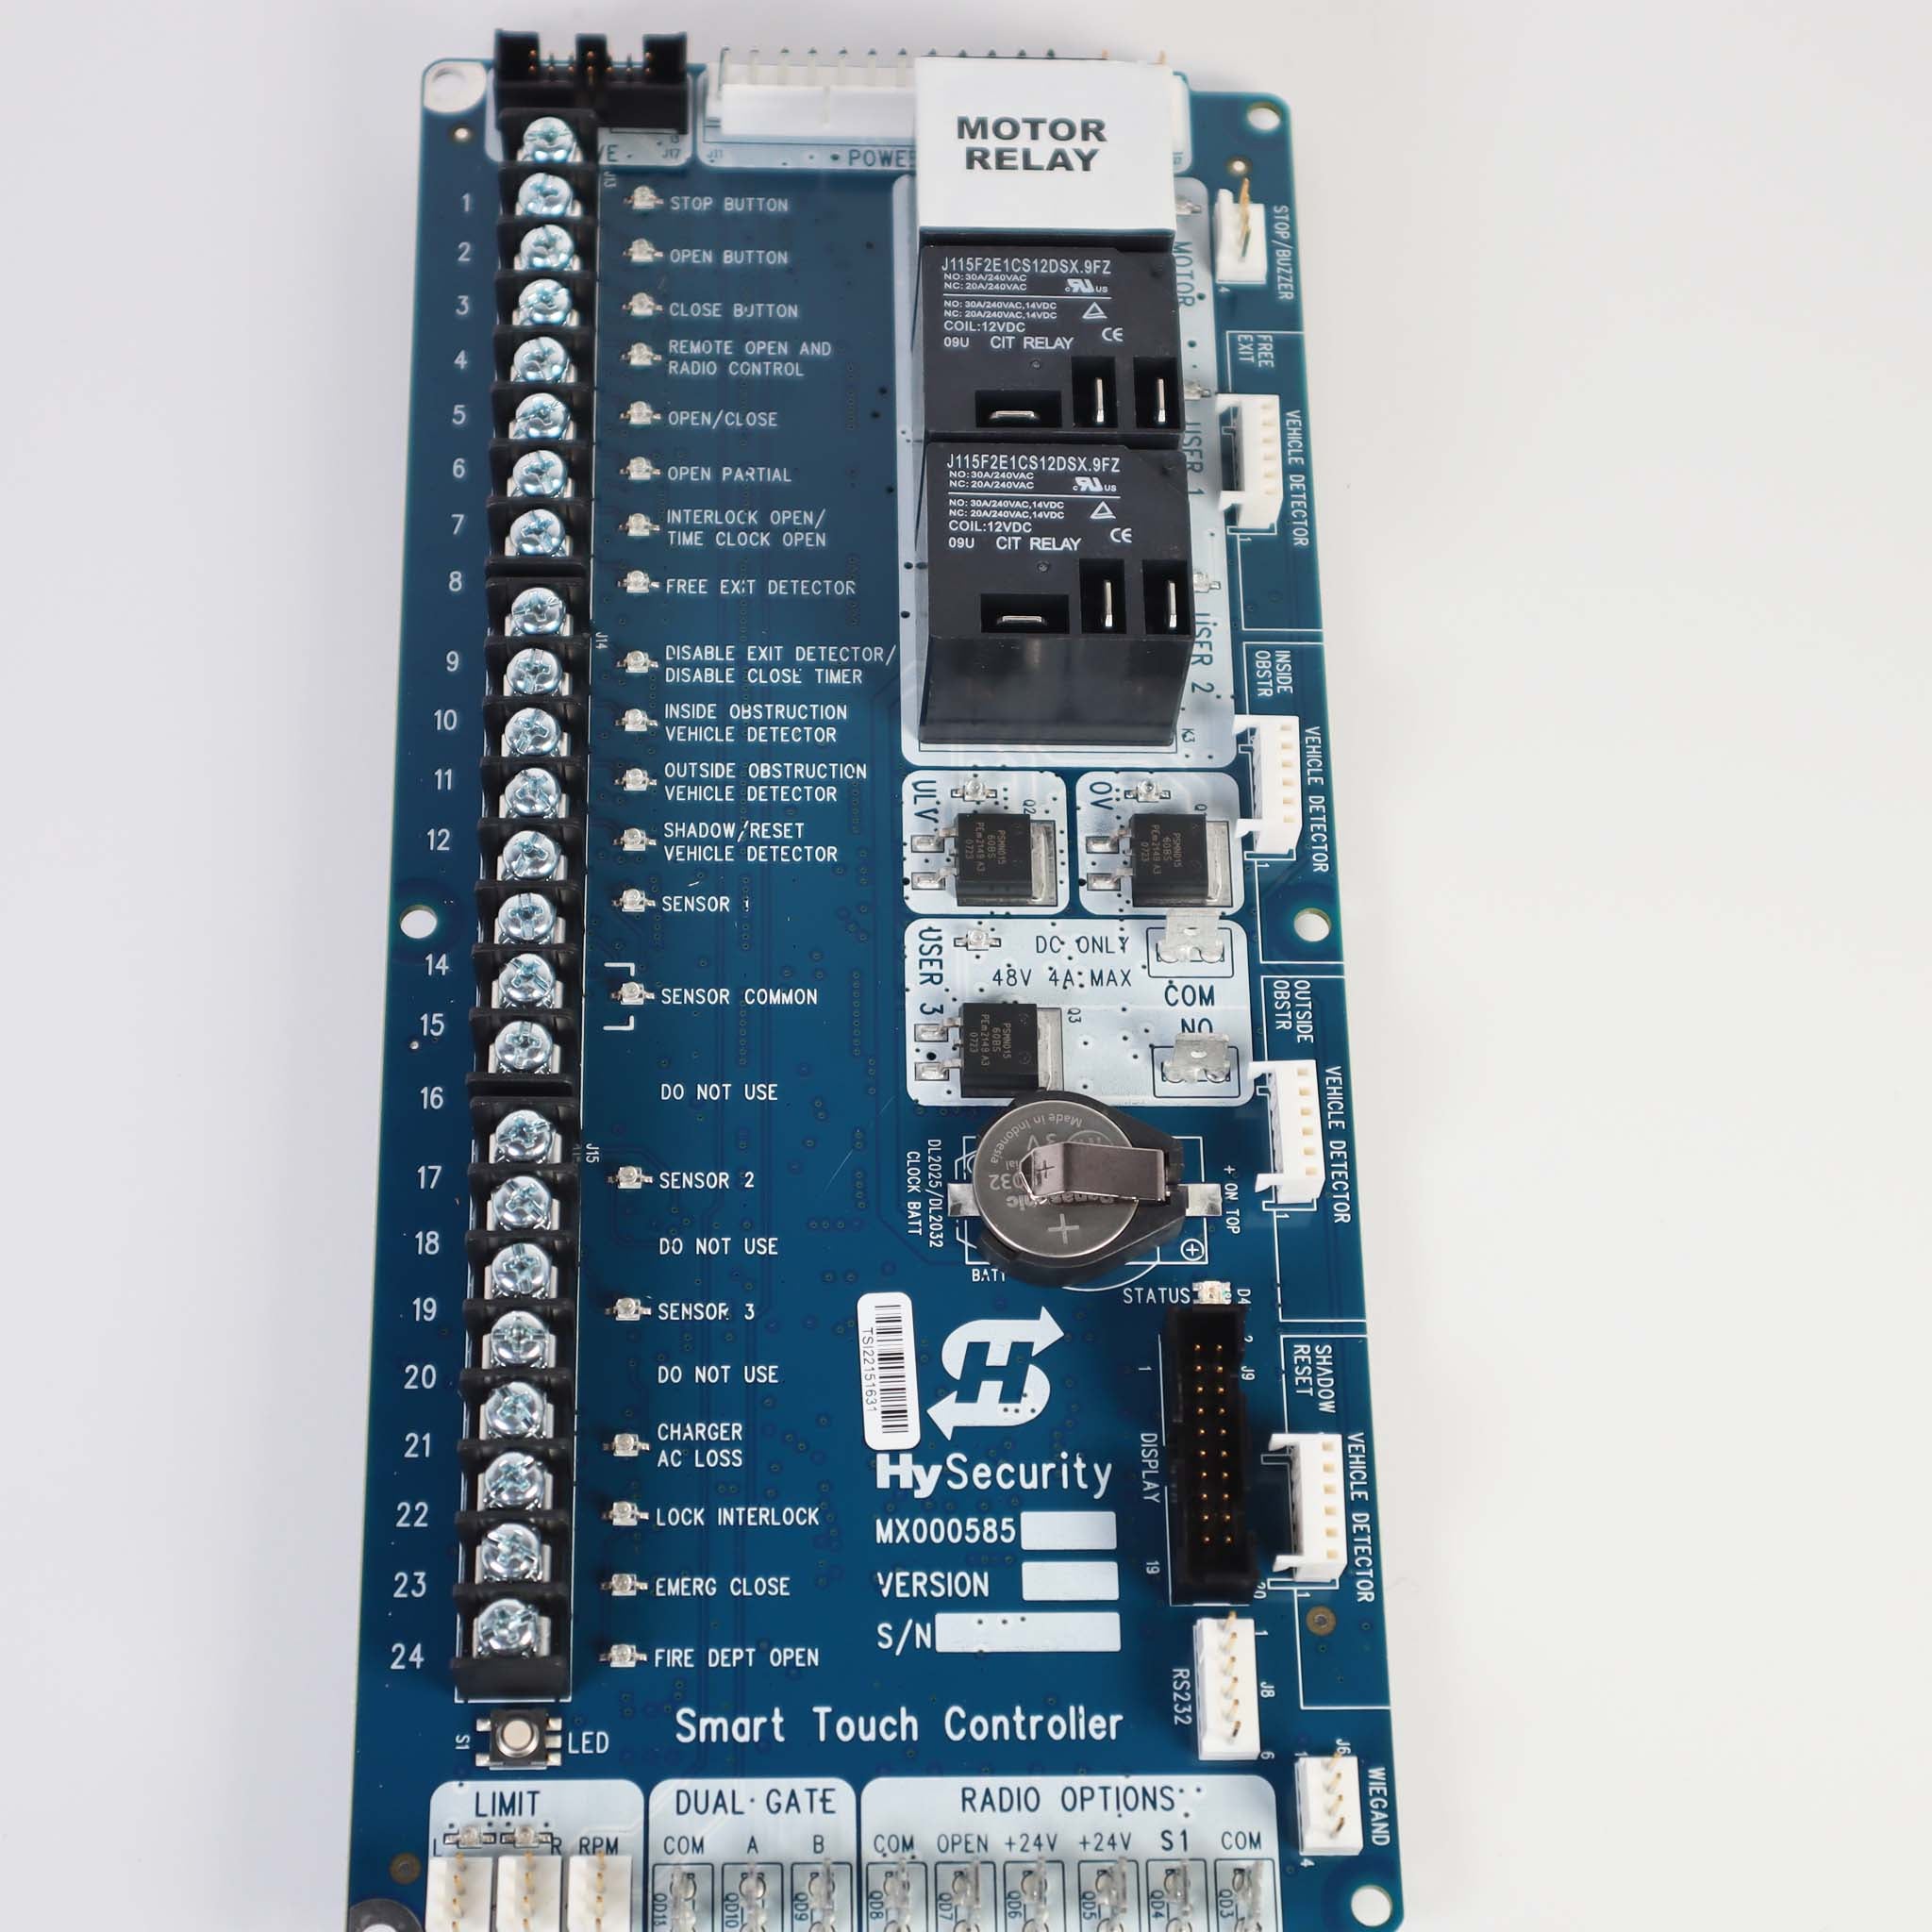 MX000585-1 Board, Smart Touch Controller